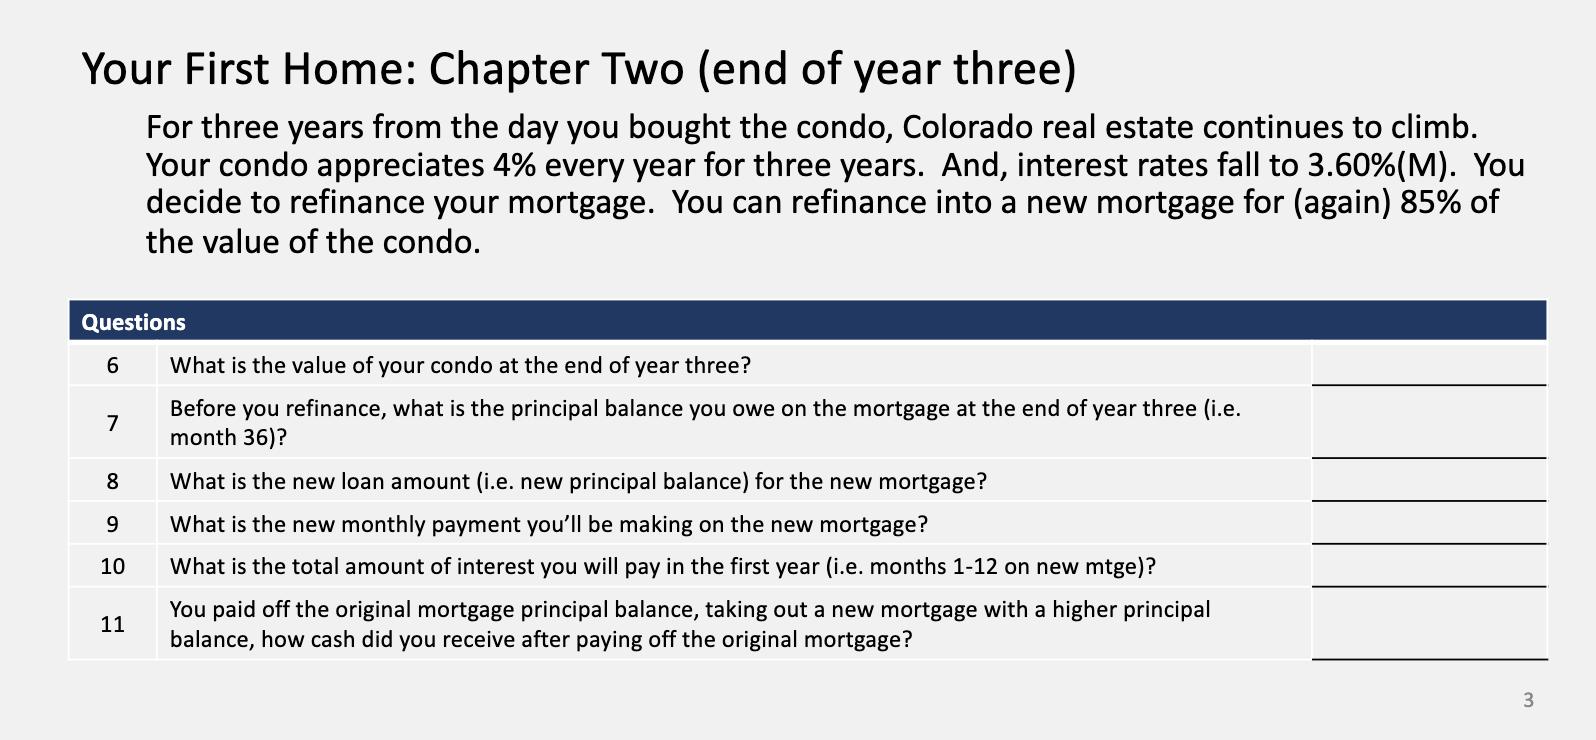 Your First Home: Chapter Two (end of year three) For three years from the day you bought the condo, Colorado real estate cont